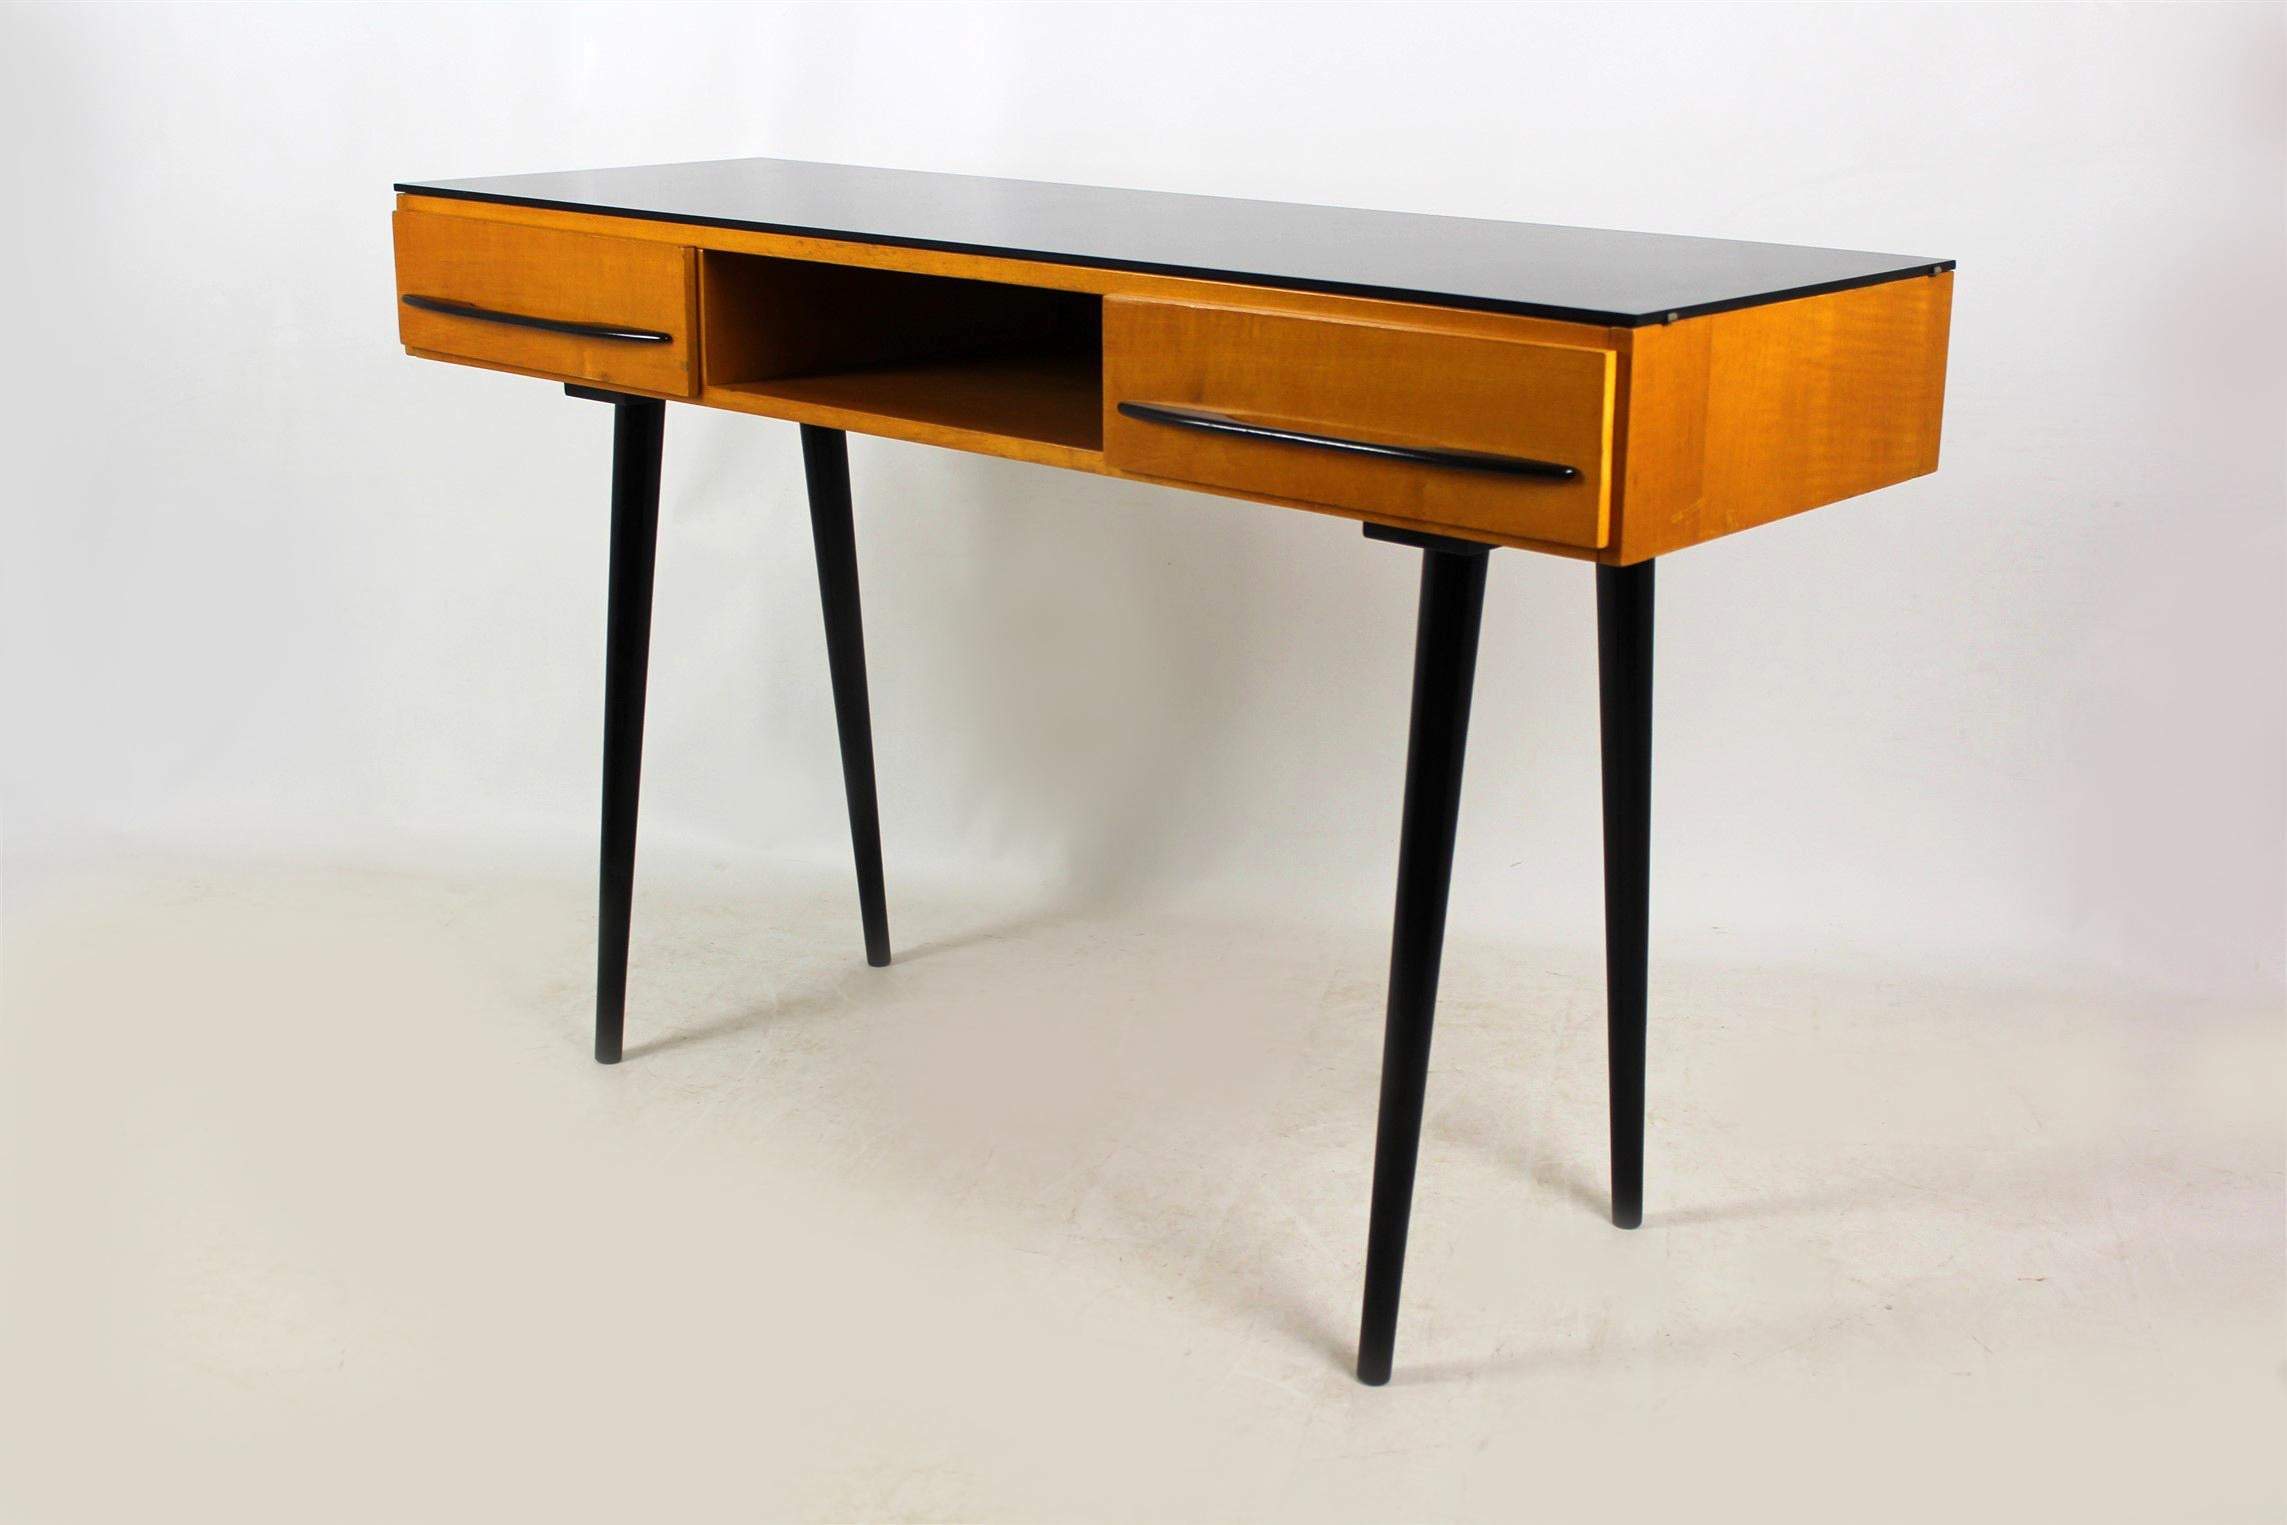 Midcentury small desk which can also be used as a console table. Designed by Mojmír Požár in 1957 and manufactured by UP Bucovice in former Czechoslovakia during the 1960s. Features two drawers, retains its original black glass on the top. Woodwork